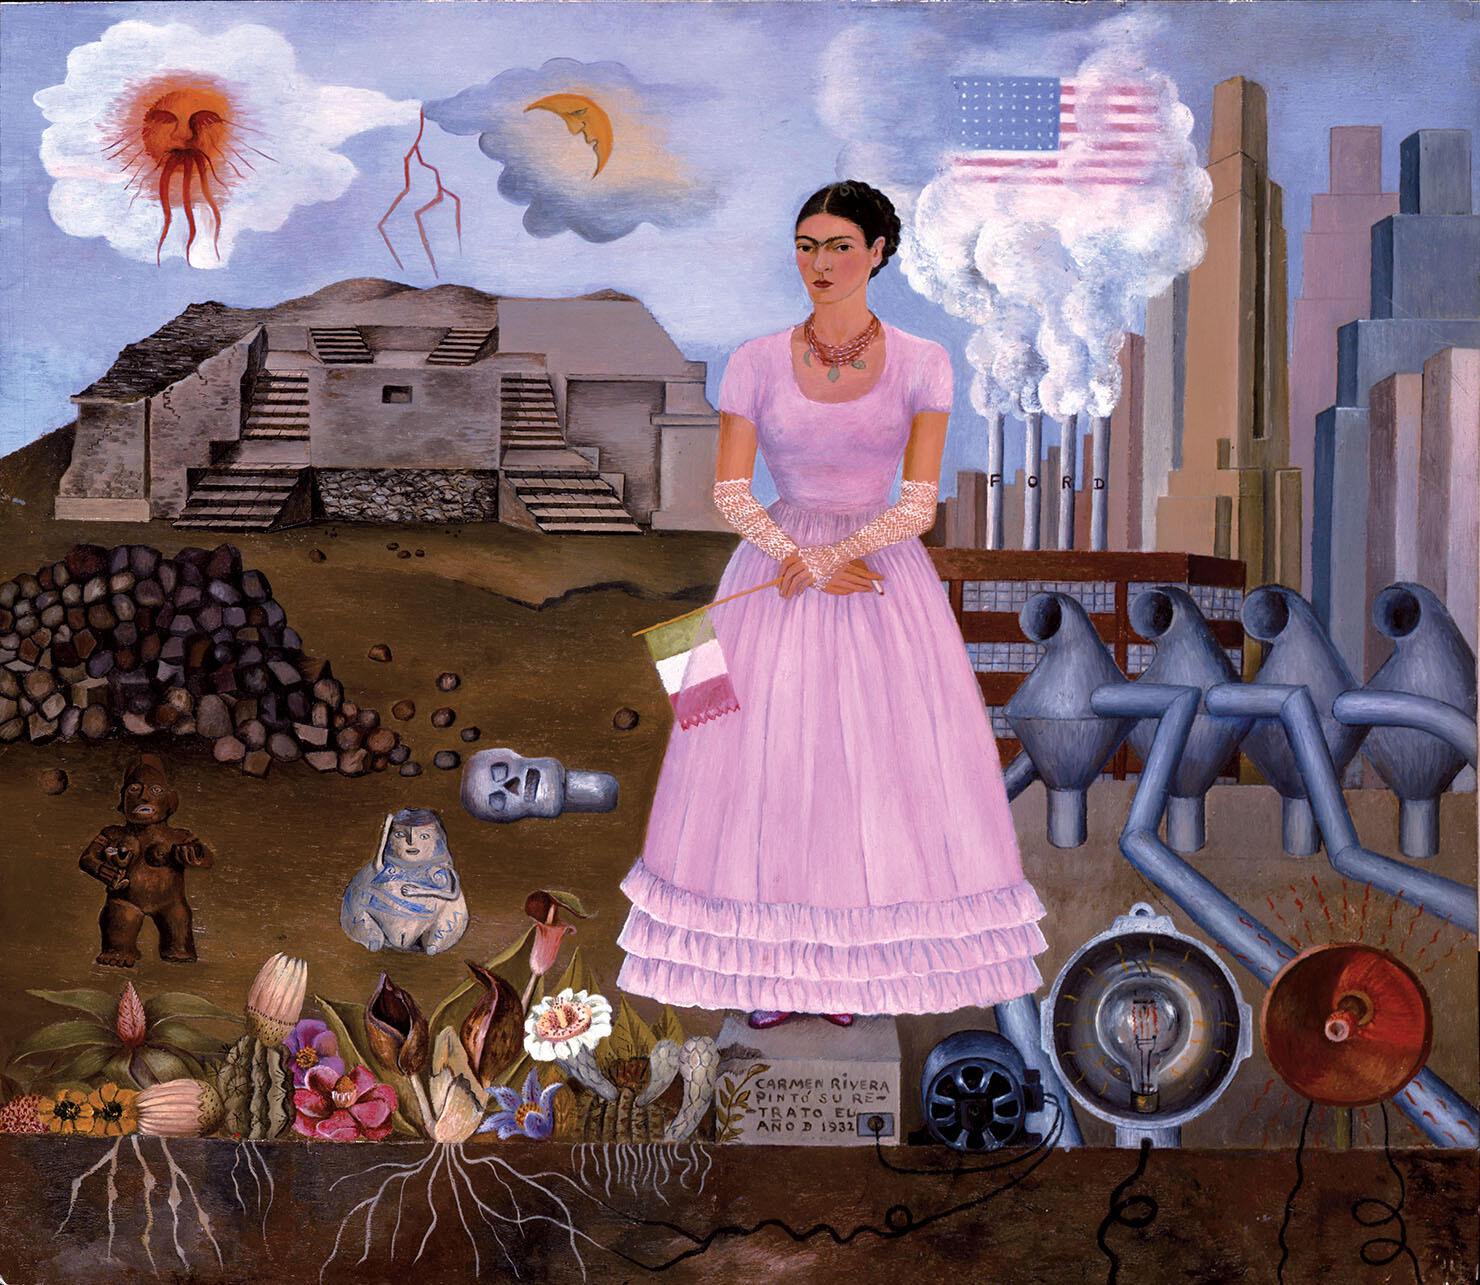 Frida Kahlo, “Self-Portrait on the Borderline Between Mexico and the United States,” 1932, oil on metal. (© 2020 Banco de México Diego Rivera Frida Kahlo Museums Trust, Mexico, D.F. / Artists Rights Society (ARS), New York.)